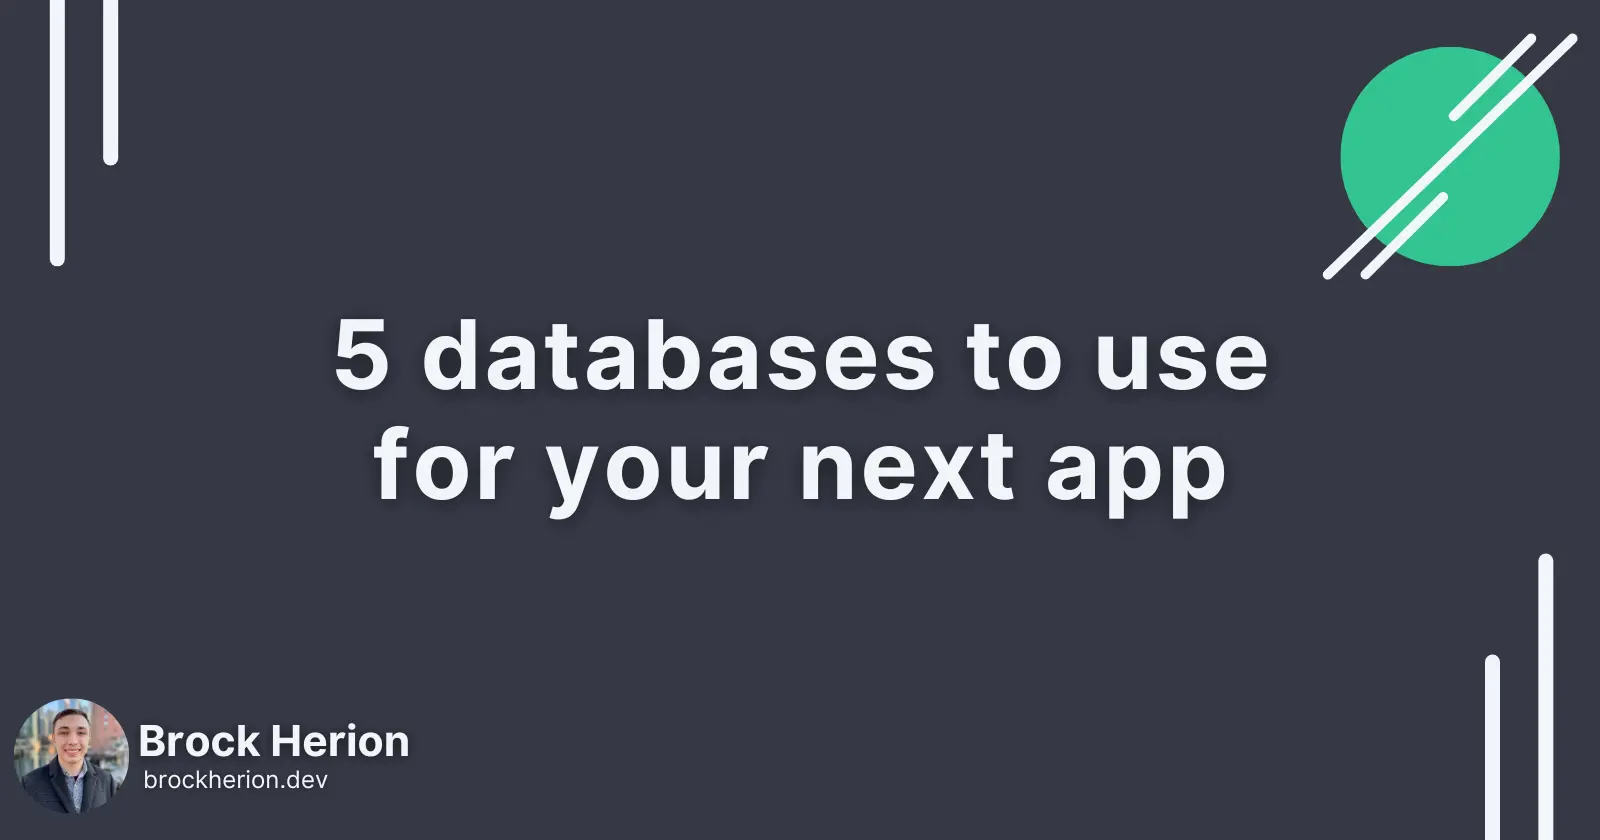 5 databases to use for your next app